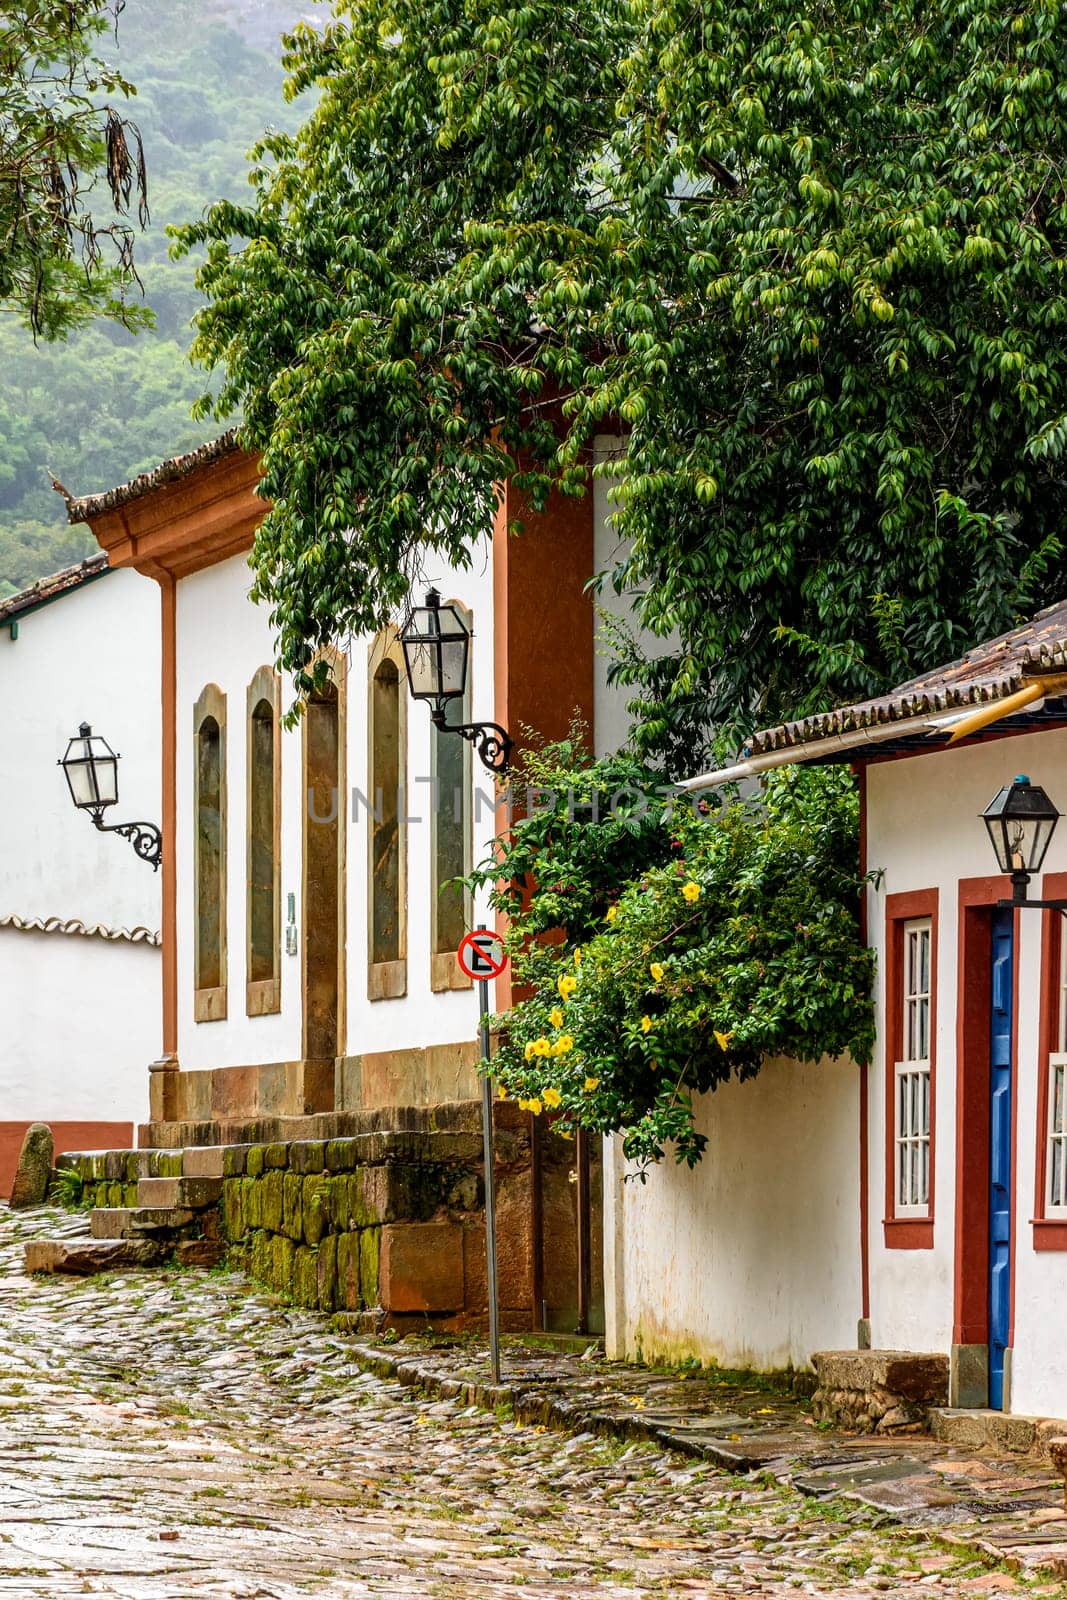 Colonial houses with colorful facades and cobblestone slopes in the historic city of Tiradentes, one of the most famous in the state of Minas Gerais